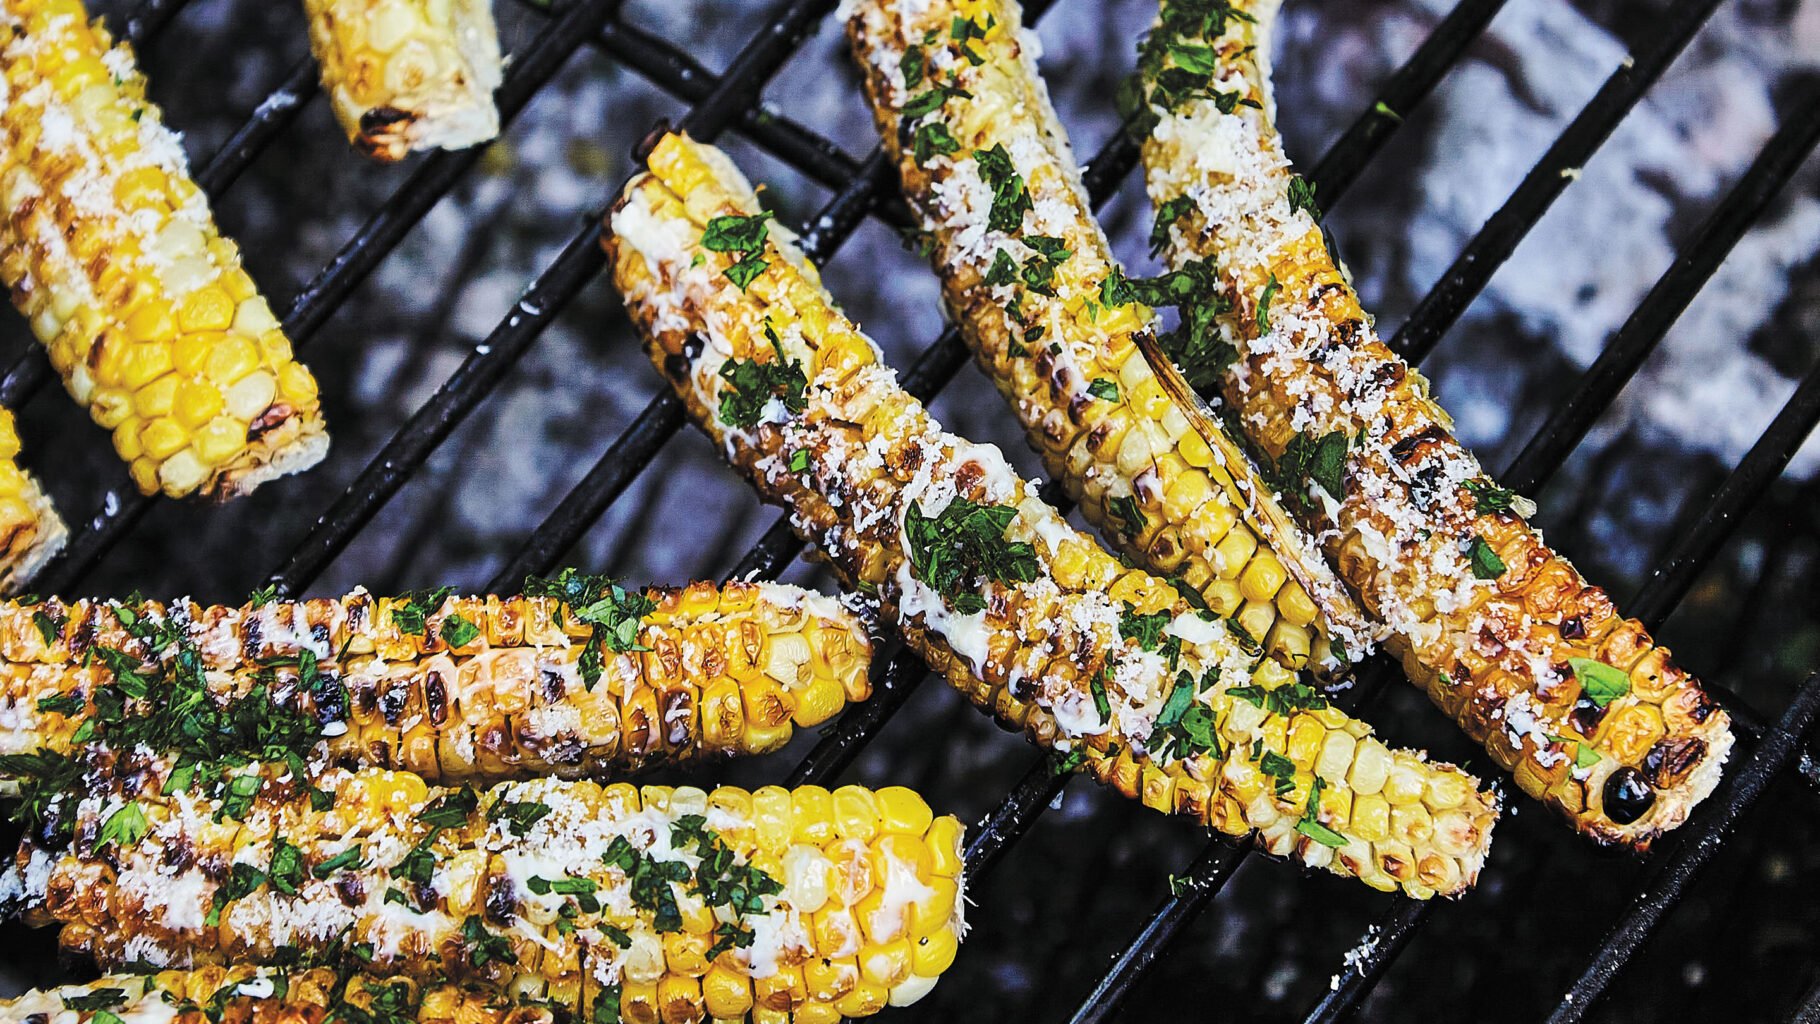 Grilled corn ribs recipe excerpted from Butcher on the Block by Matt Moore. © Matt Moore 2023. Published by Harvest, an imprint of HarperCollins. Photos © Andrea Behrends.